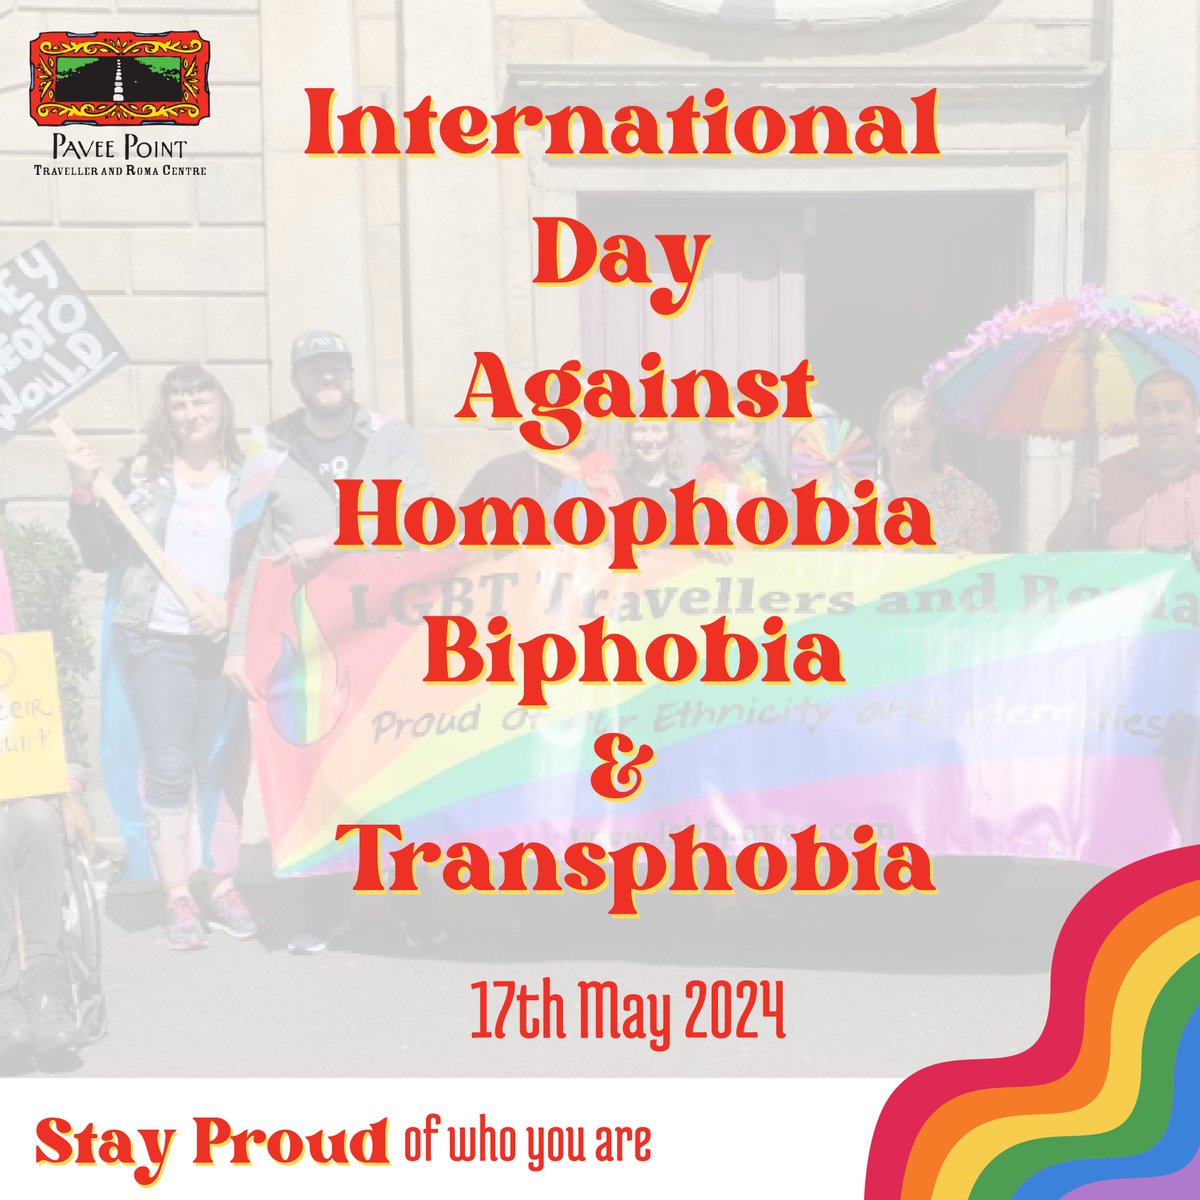 Today is International Day Against Homophobia, Biphobia & Transphobia. We stand in solidarity with Lesbian, Gay, Transgender, Intersex and Queer (LGBTI+) #Traveller and #Roma. LGBTQI+ rights are human rights. For advice & support: travandromalgbti.ie #IDAHOBIT2024